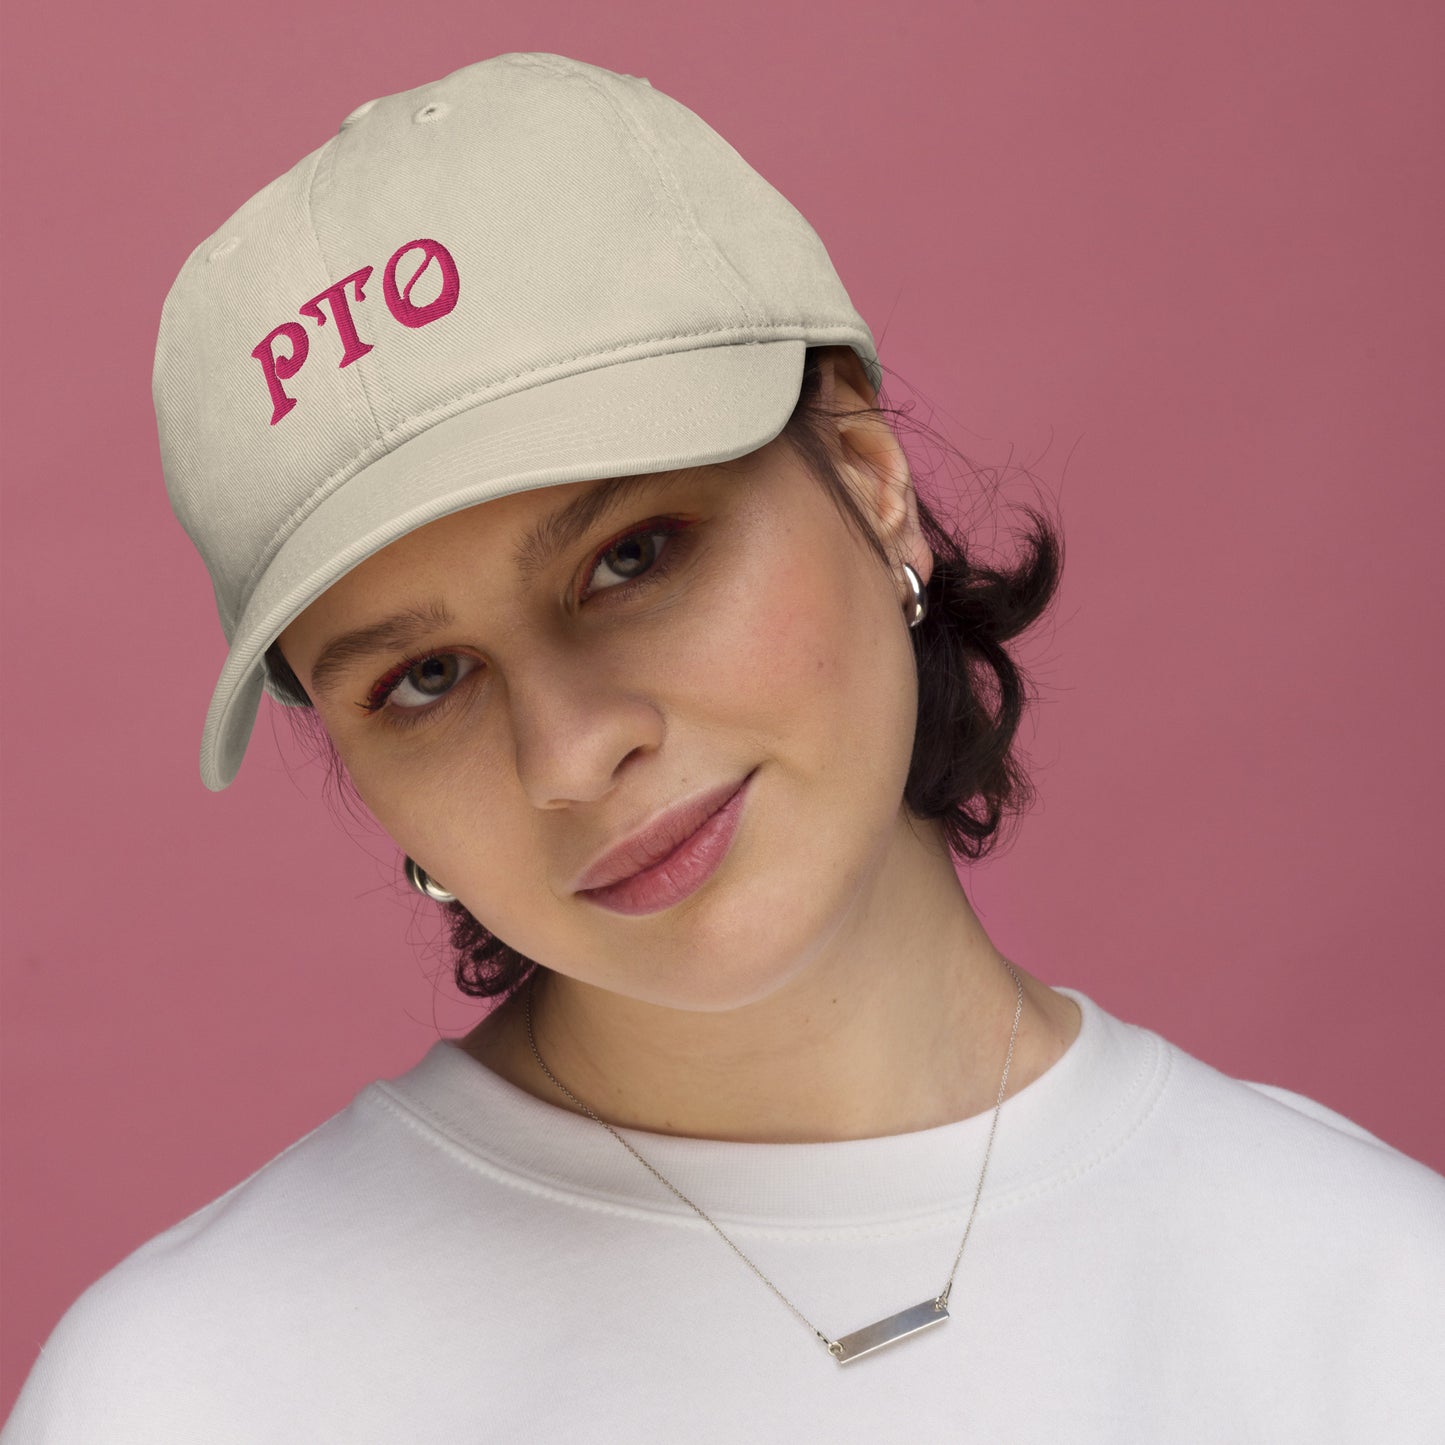 PTO Flamingo Pink Embroidered Organic dad hat